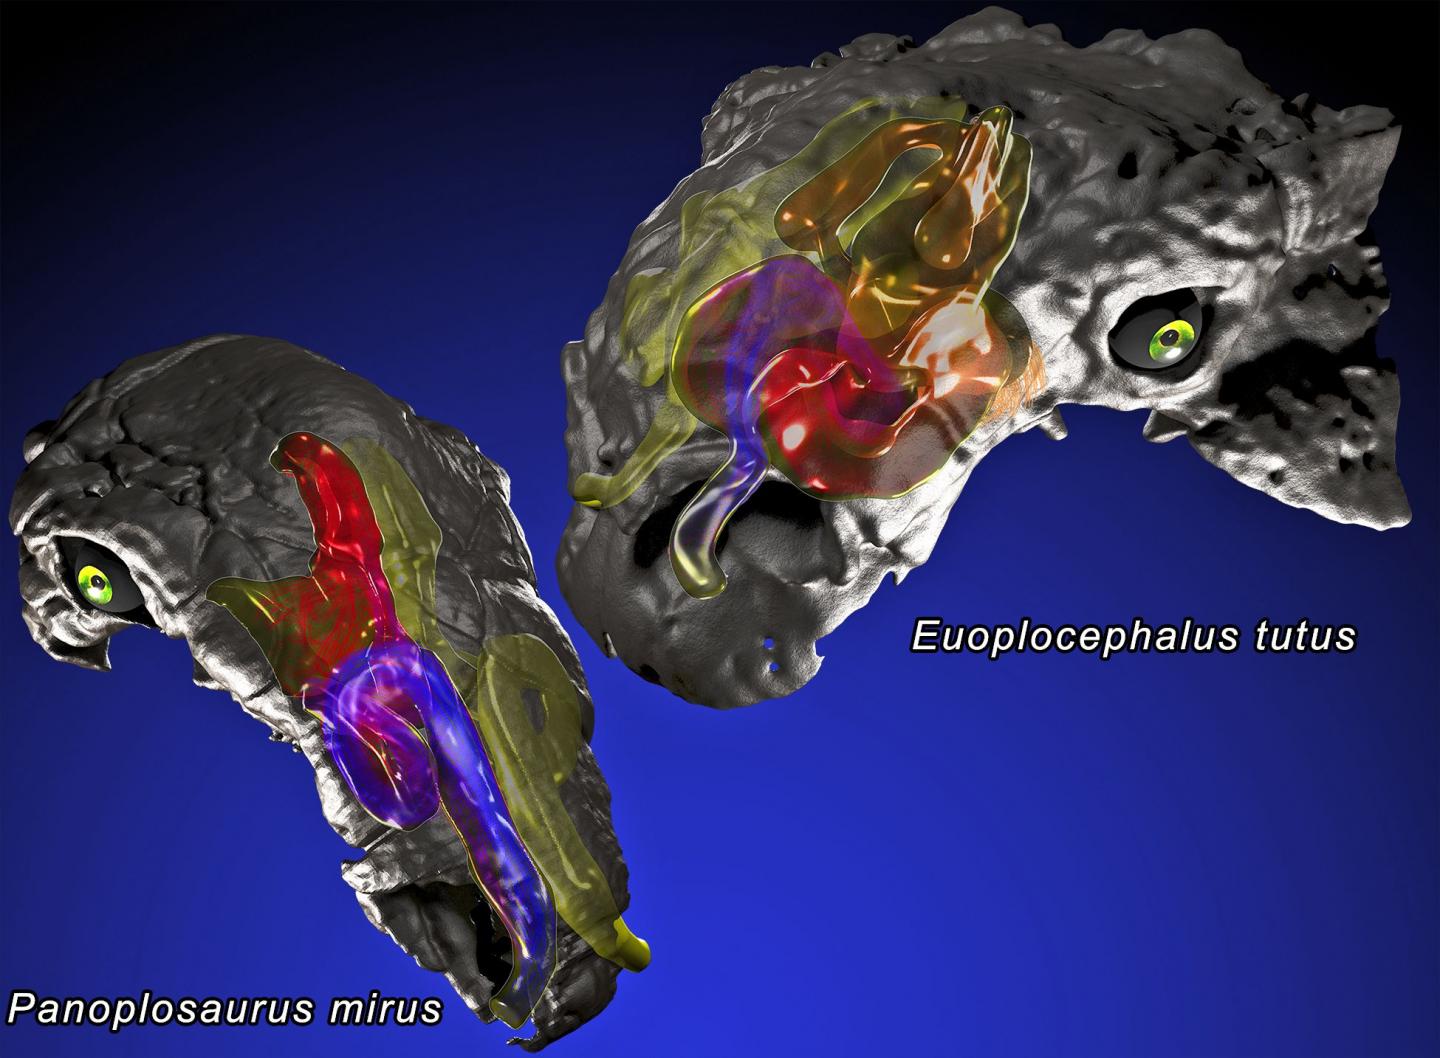 Ankylosaurs Likely Regulated Body Temperature with Elaborate Nasal Passages